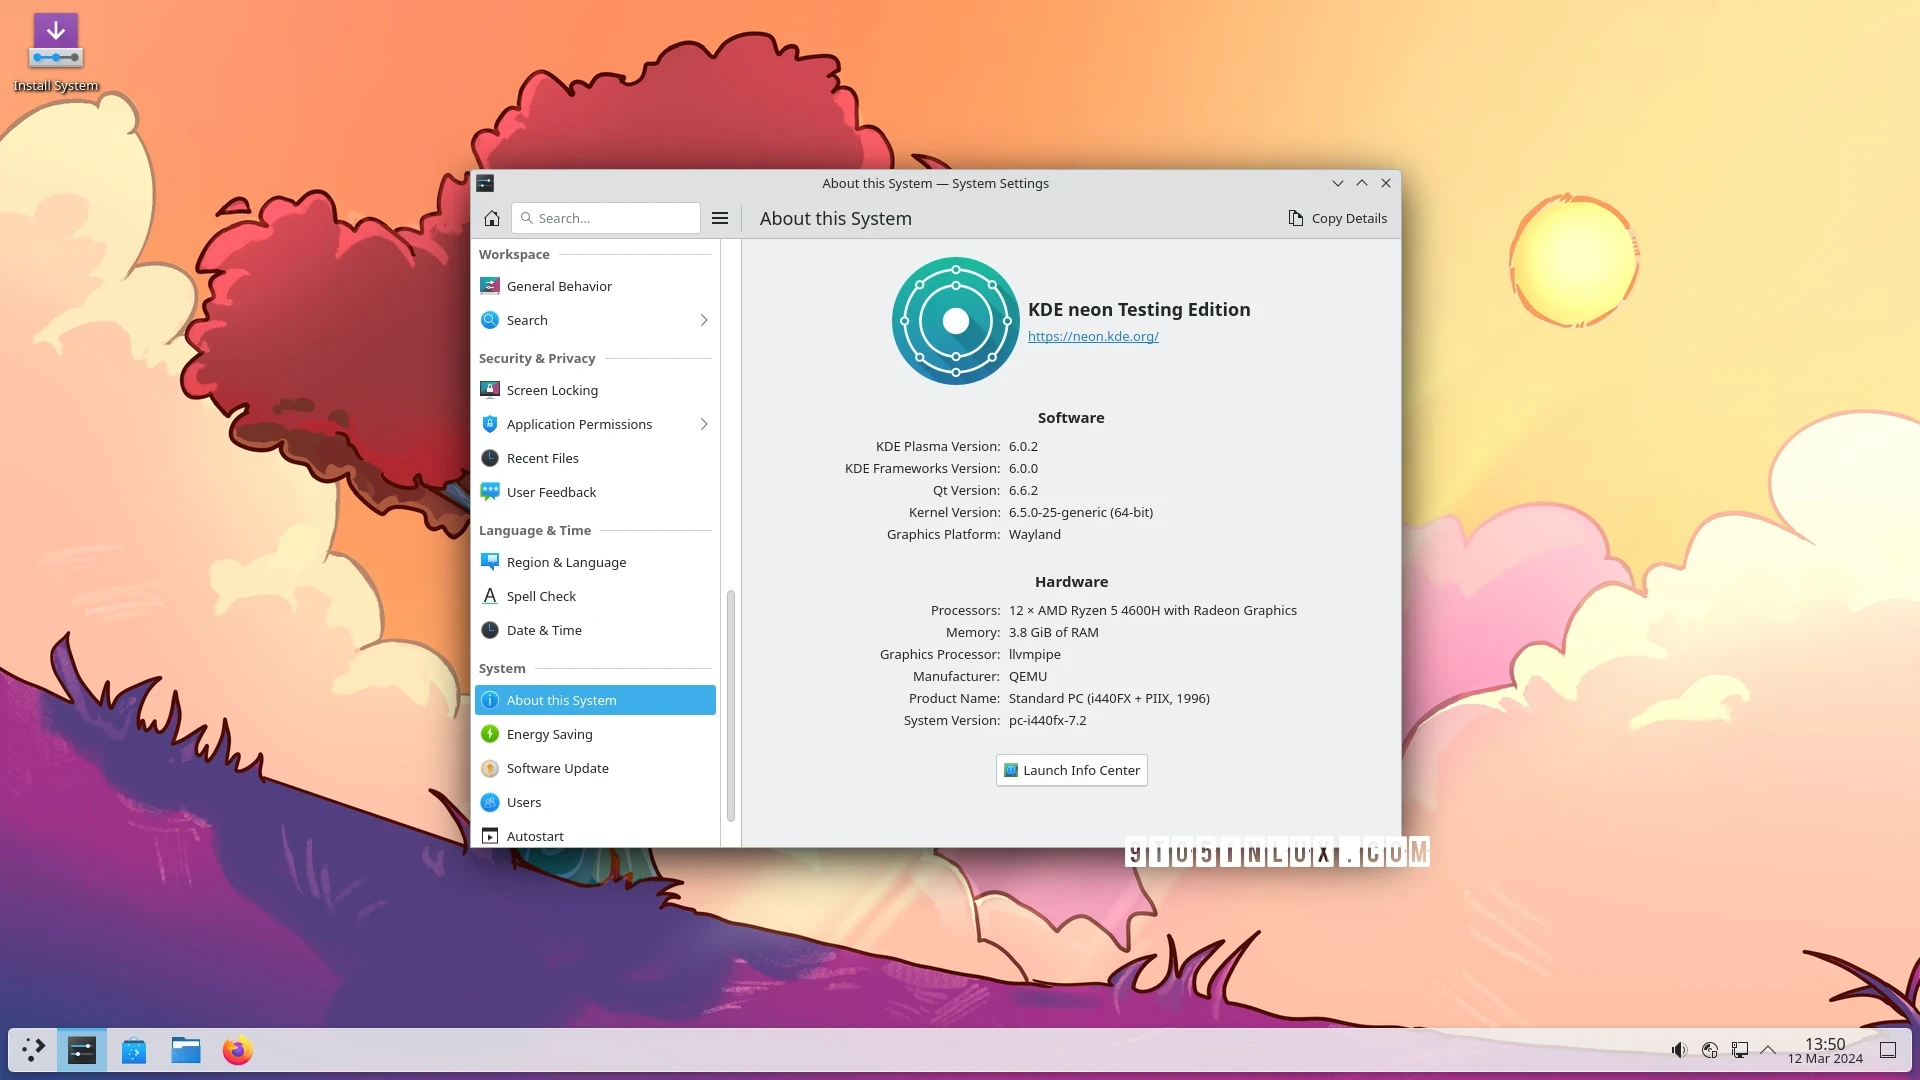 Screenshot of the KDE neon distribution with the KDE Plasma 6.0.2 desktop environment showing the About This System page in System Settings.